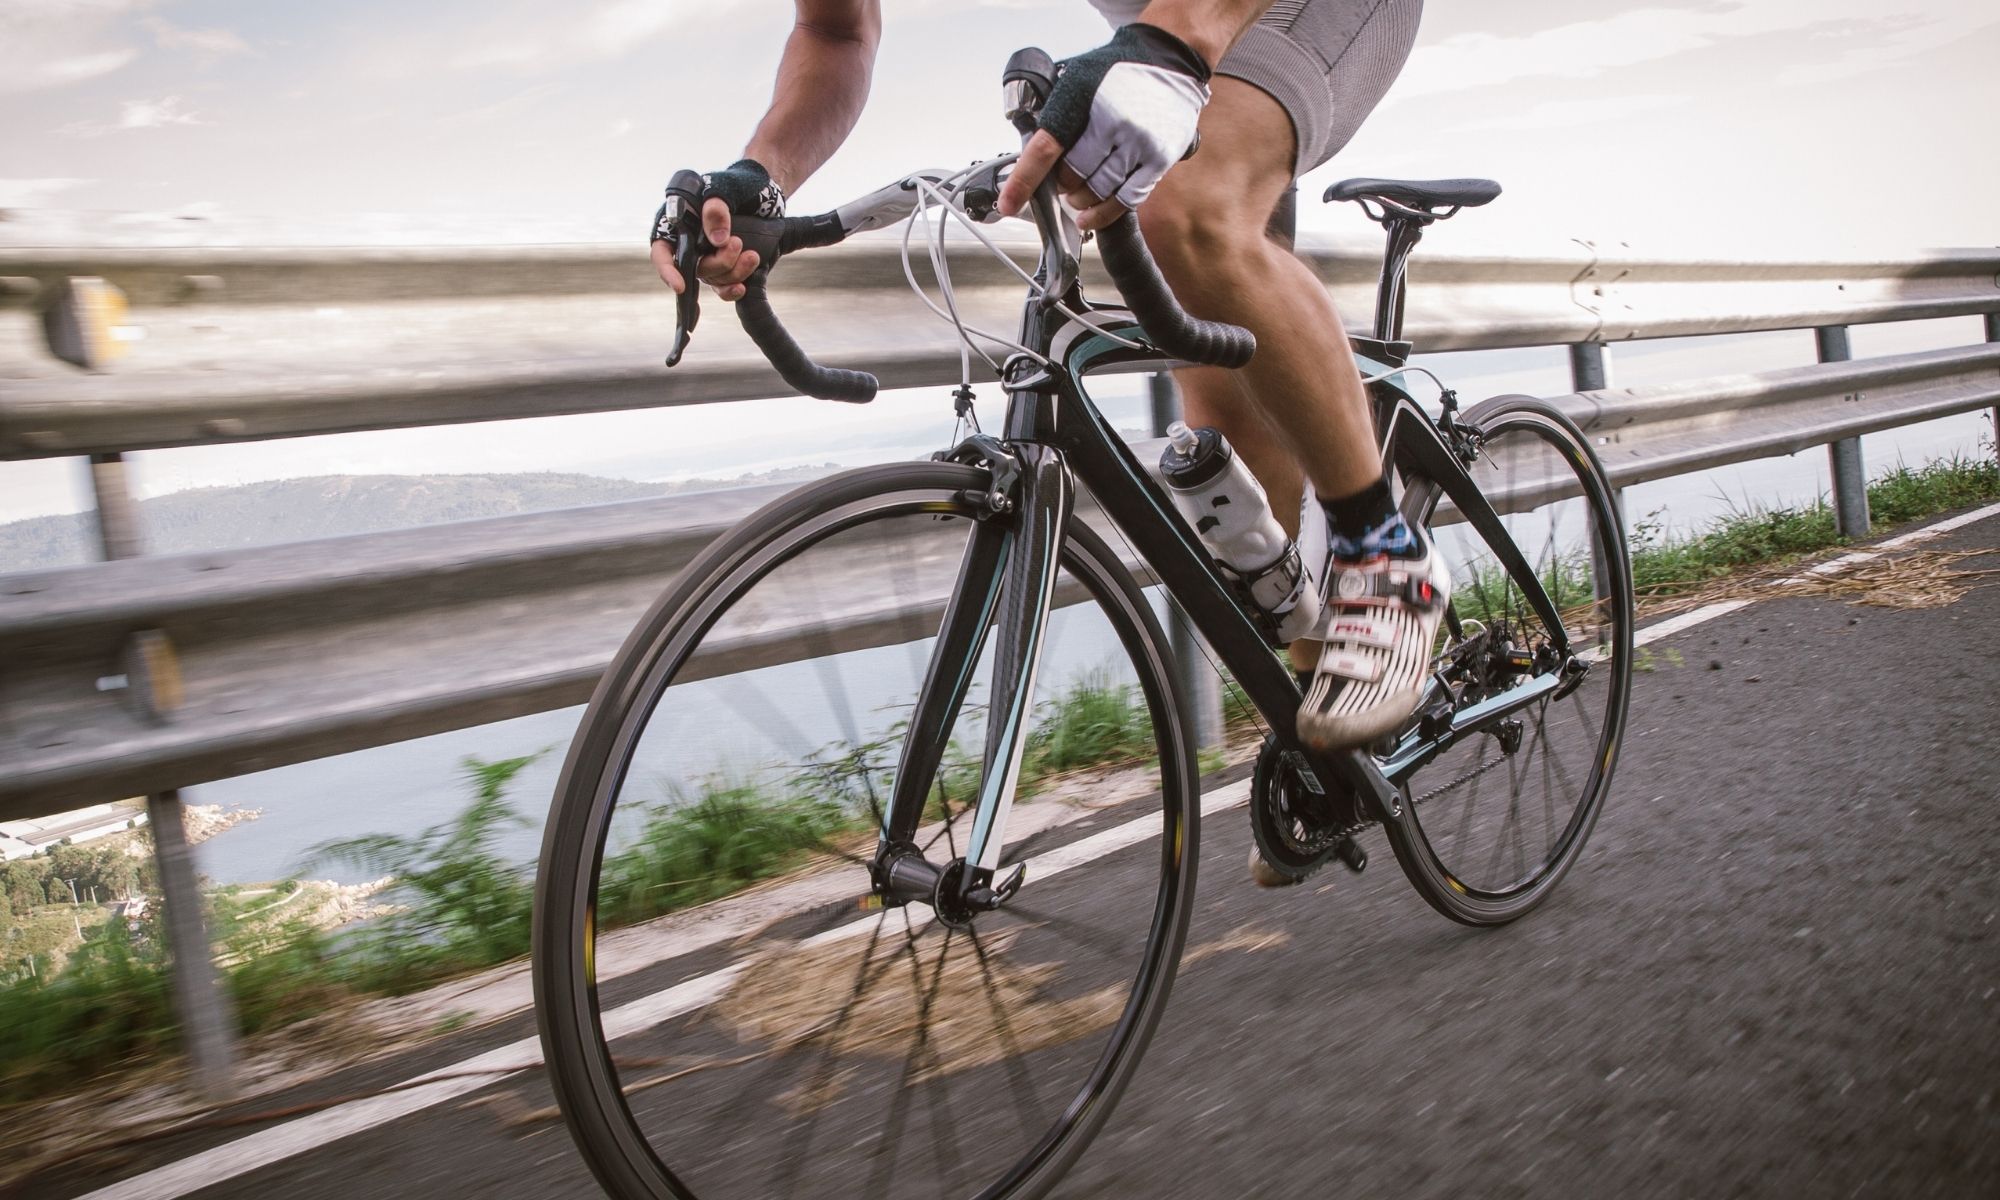 Cycling for exercise or as a sport